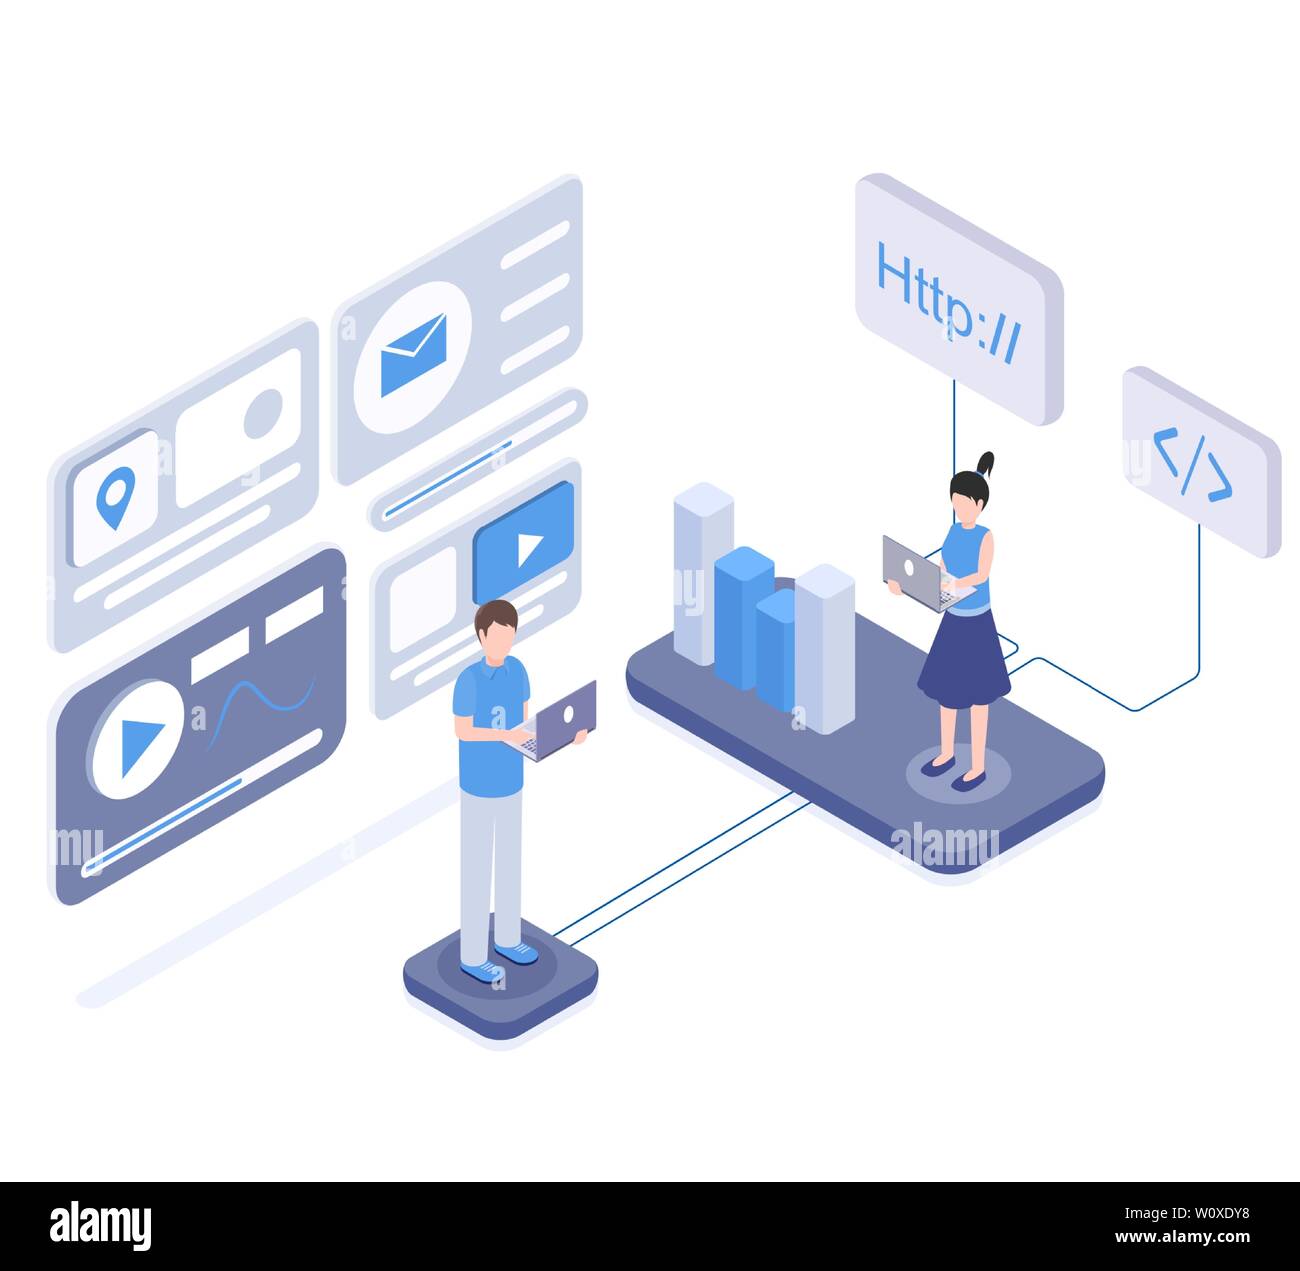 Software coding and testing isometric illustration. SEO, digital marketing research, analytics, mobile app development. Developer programming website, marketer analyzing diagram 3d characters Stock Vector